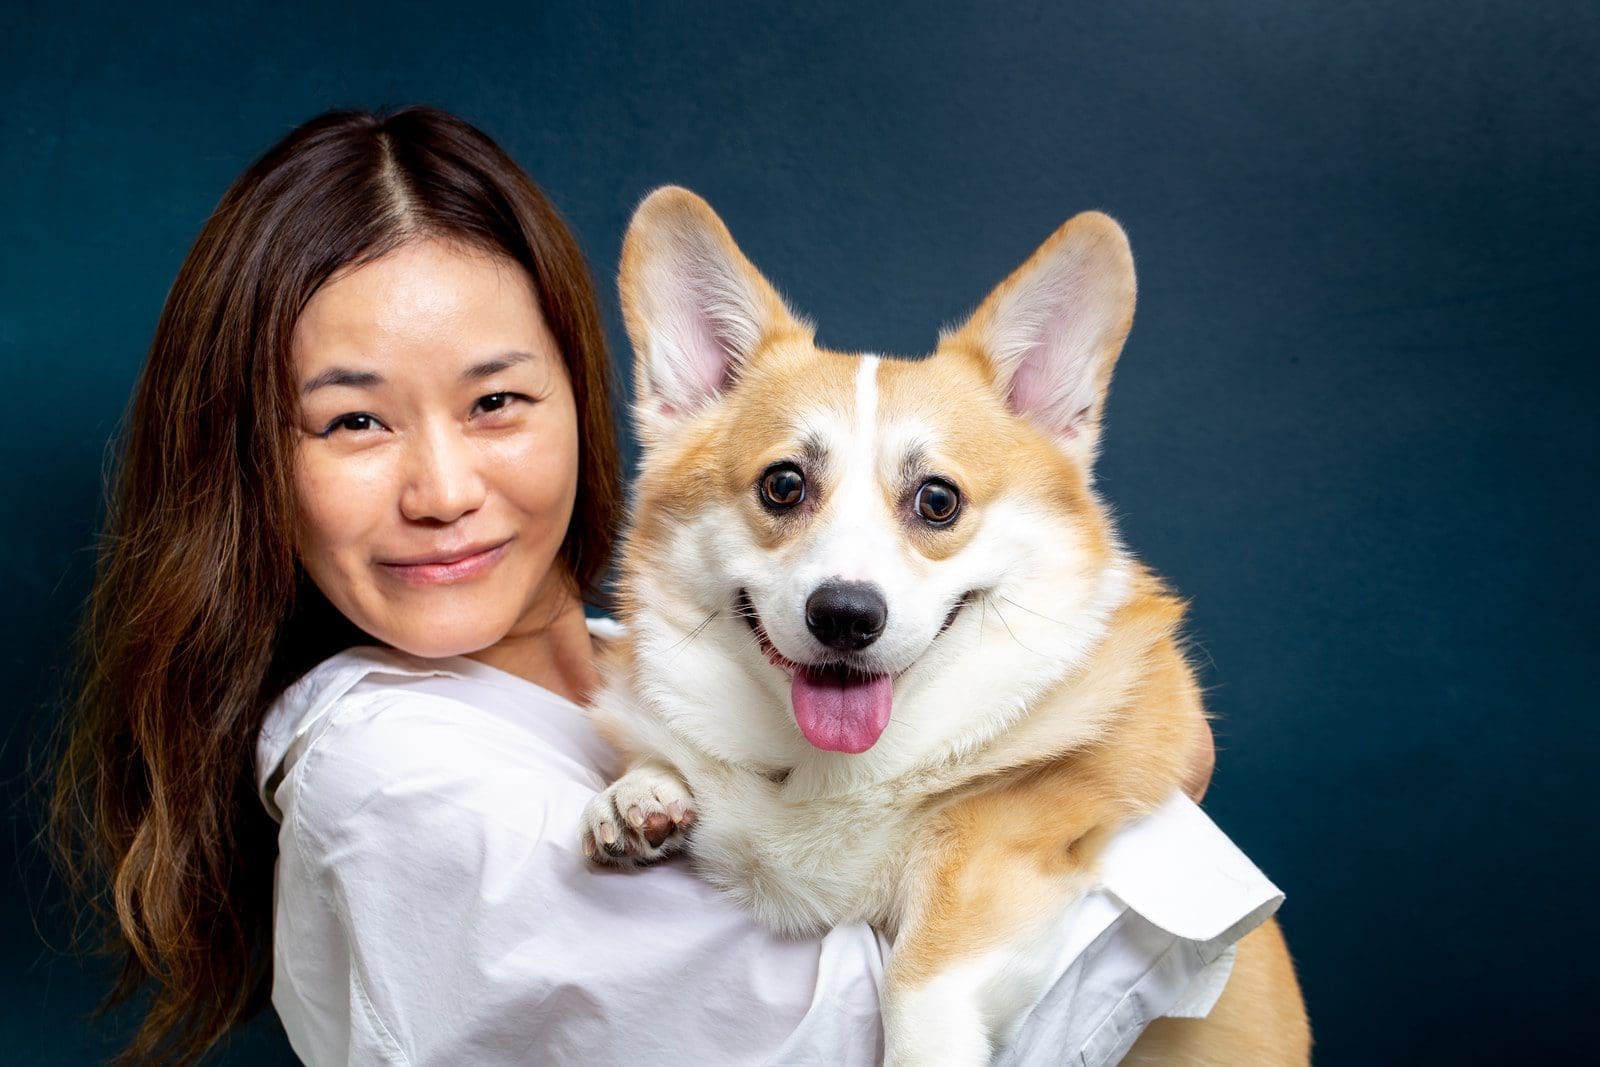 veterinary clinic woman in white shirt holding brown and white dog